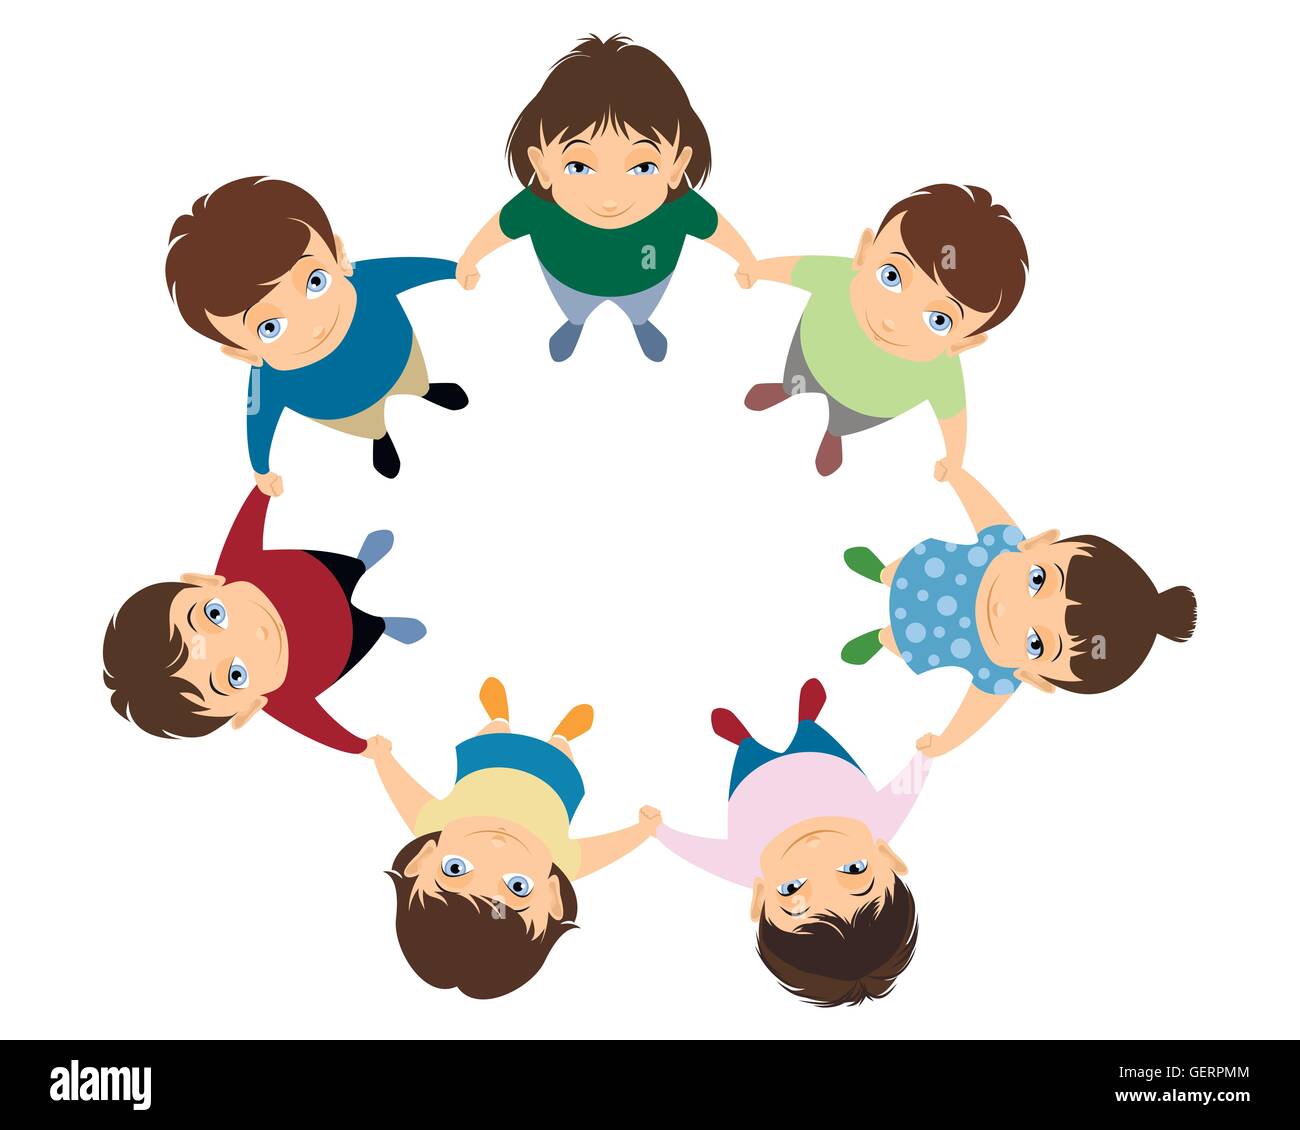 Friends circle holding hands Stock Vector Images - Alamy